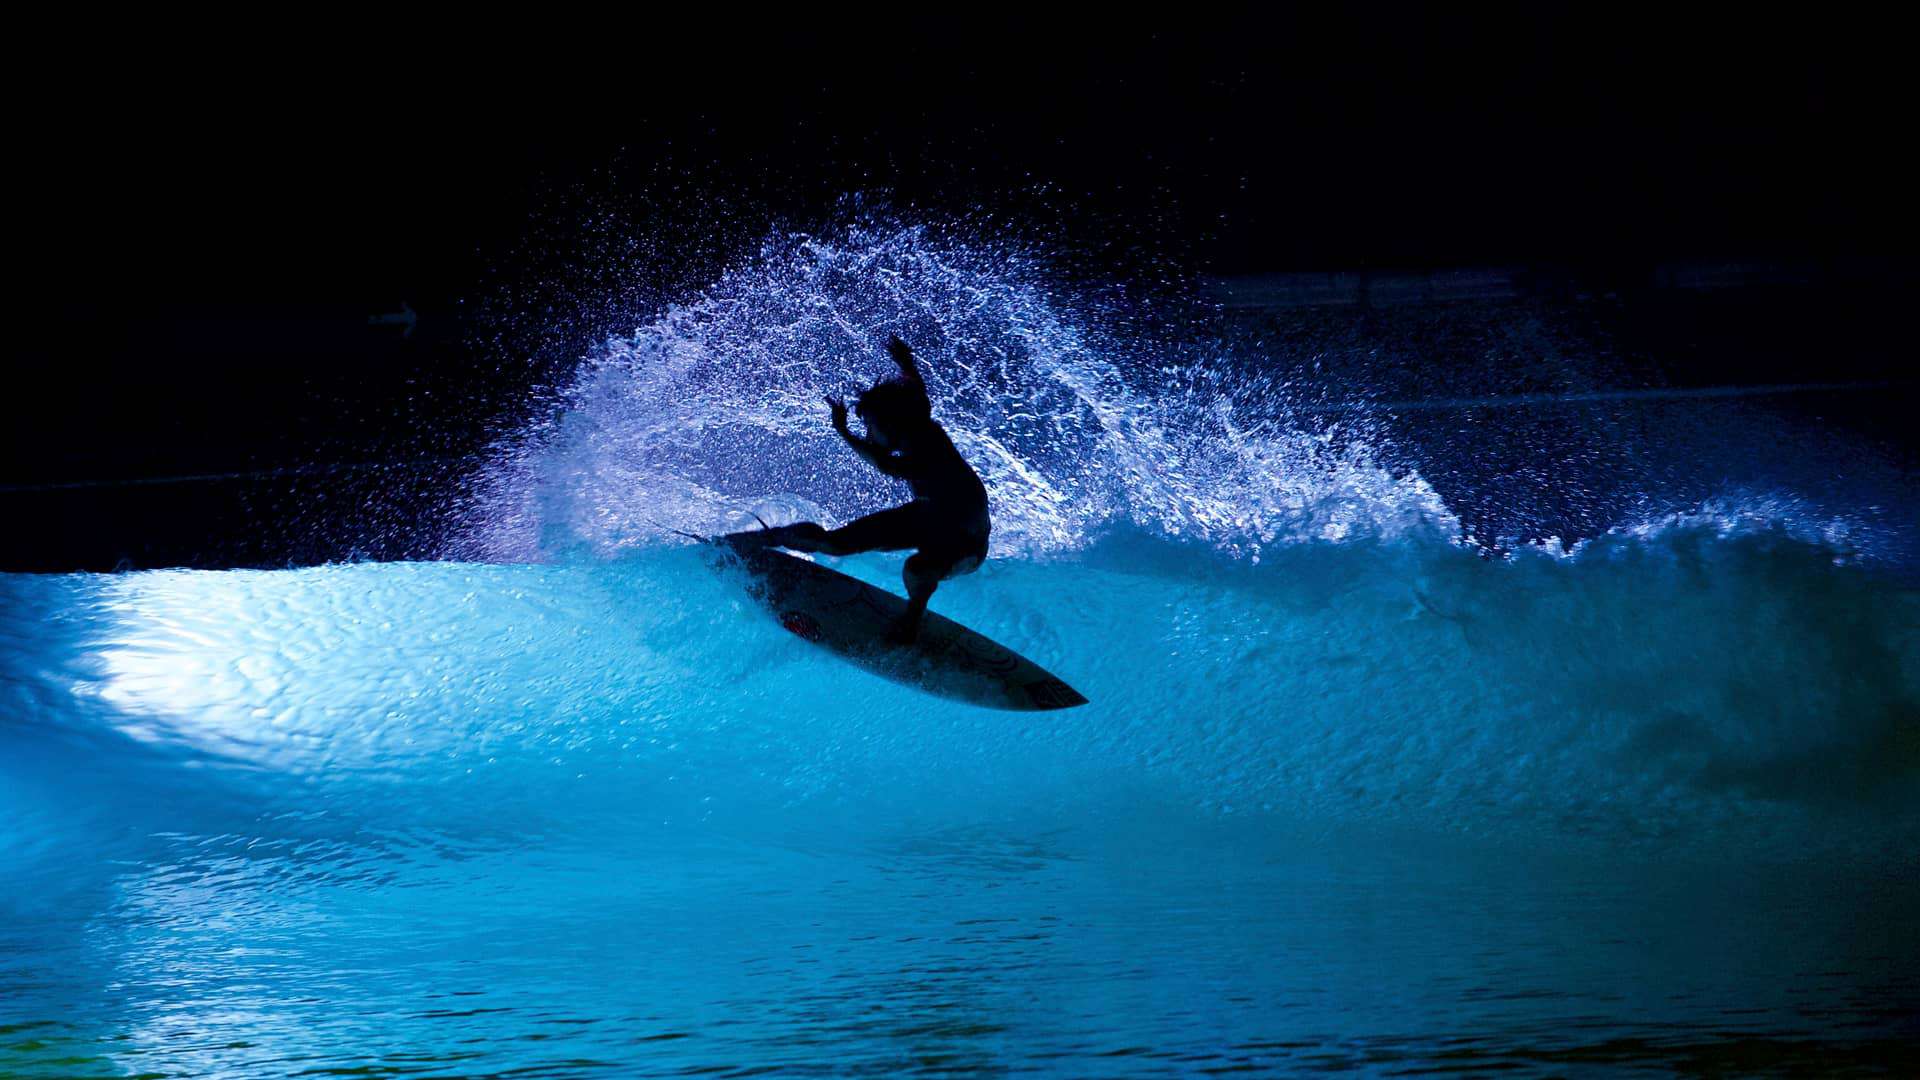 is surfing at night dangerous